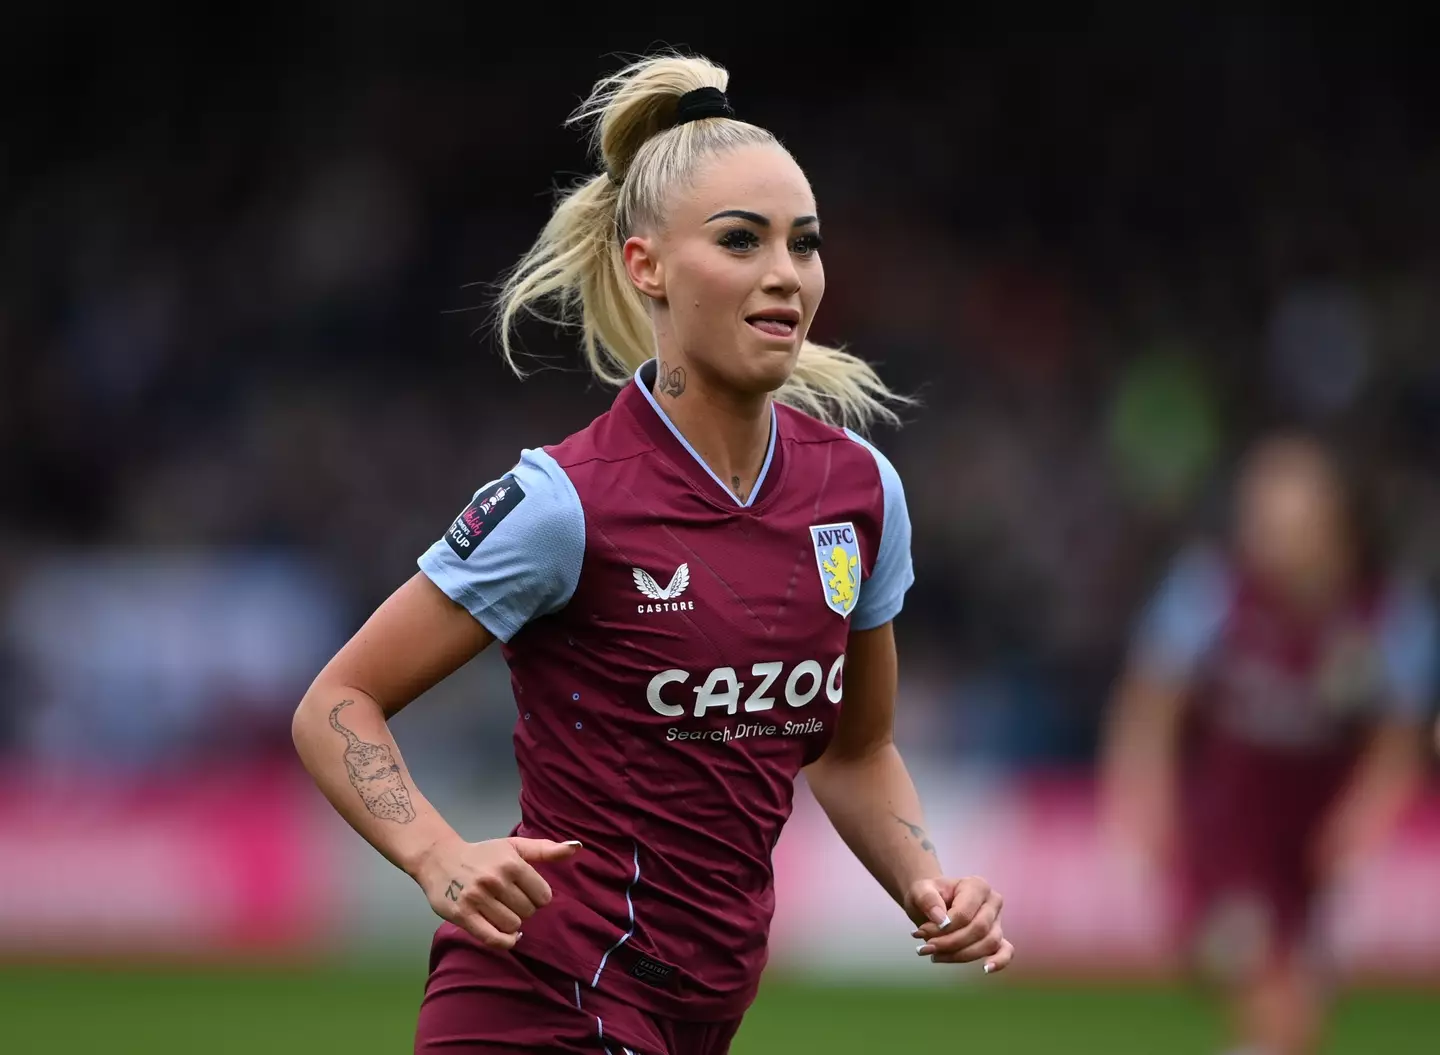 Alisha Lehmann and the rest of Aston Villa are due to host Manchester United women this weekend.